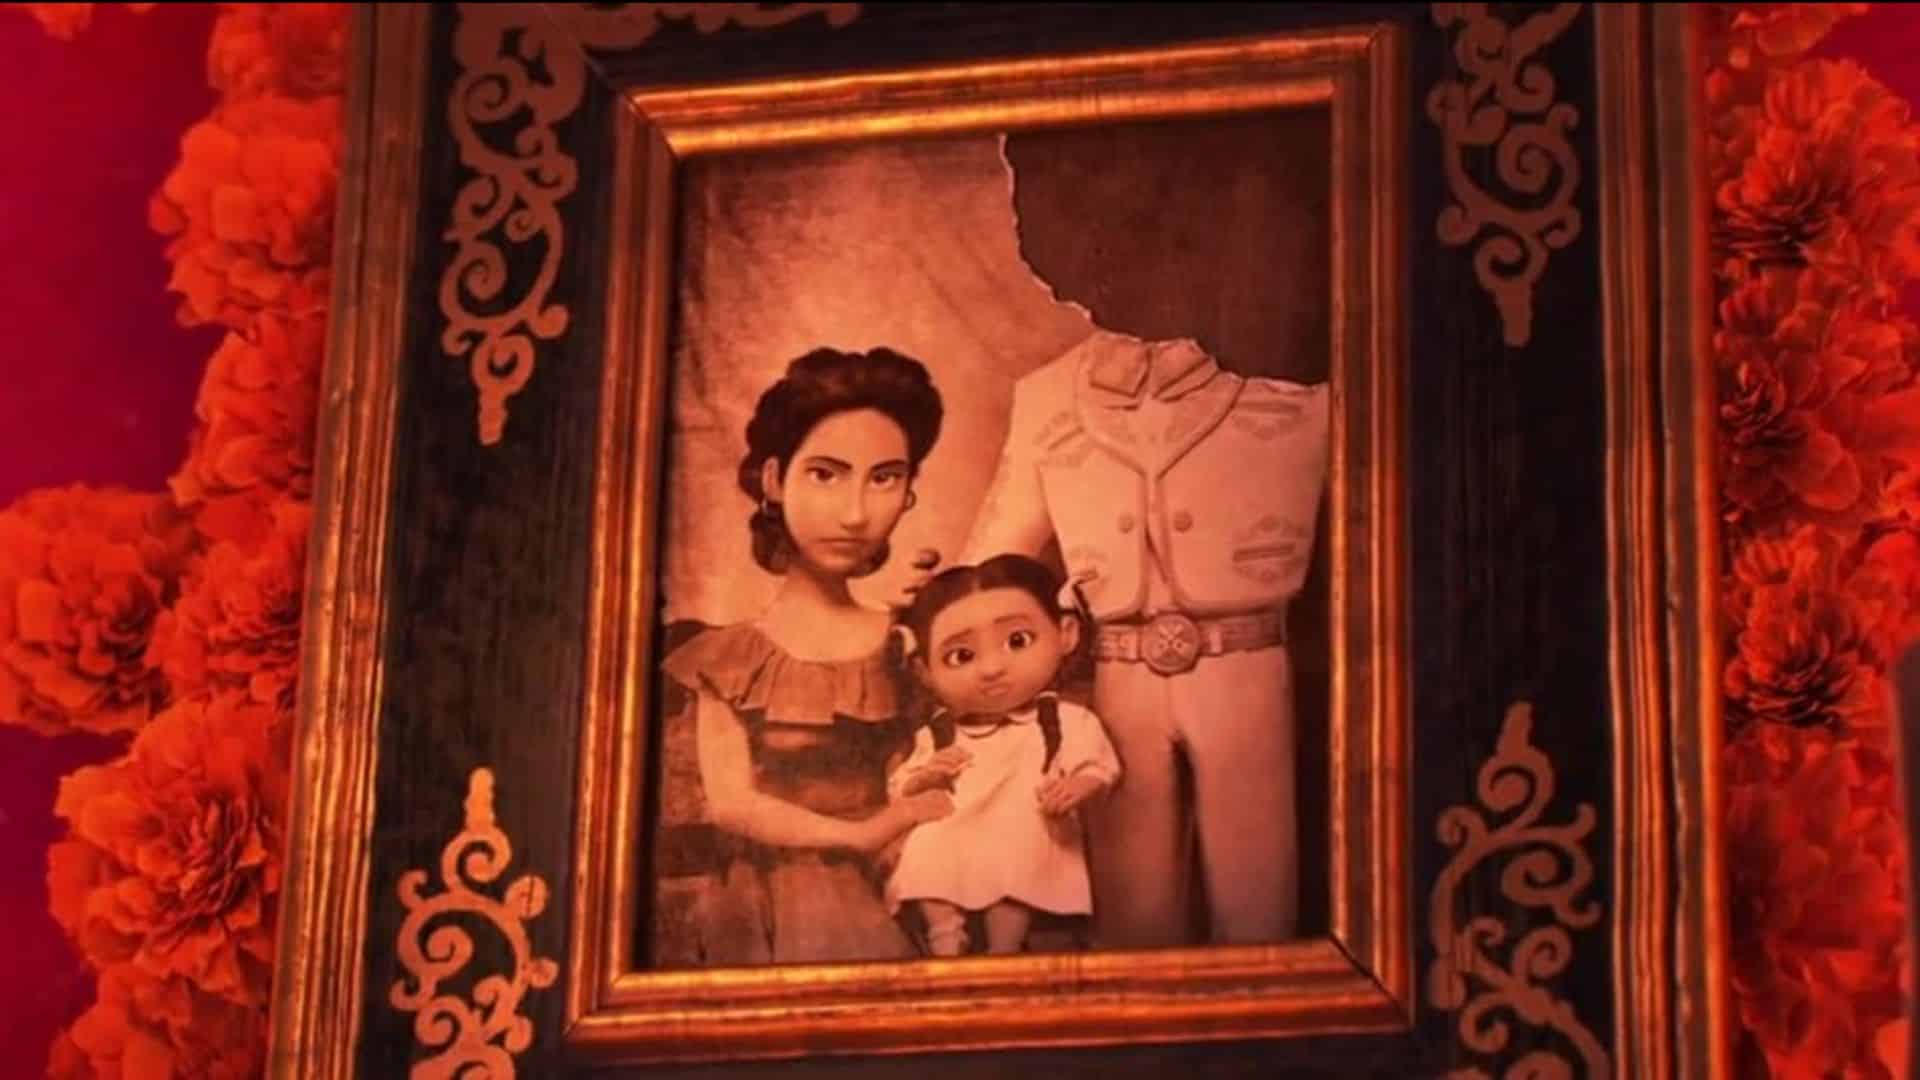 A photo of Mamá Imelda, Mamá Coco, and an unknown male figure in this image from Walt Disney Studios.